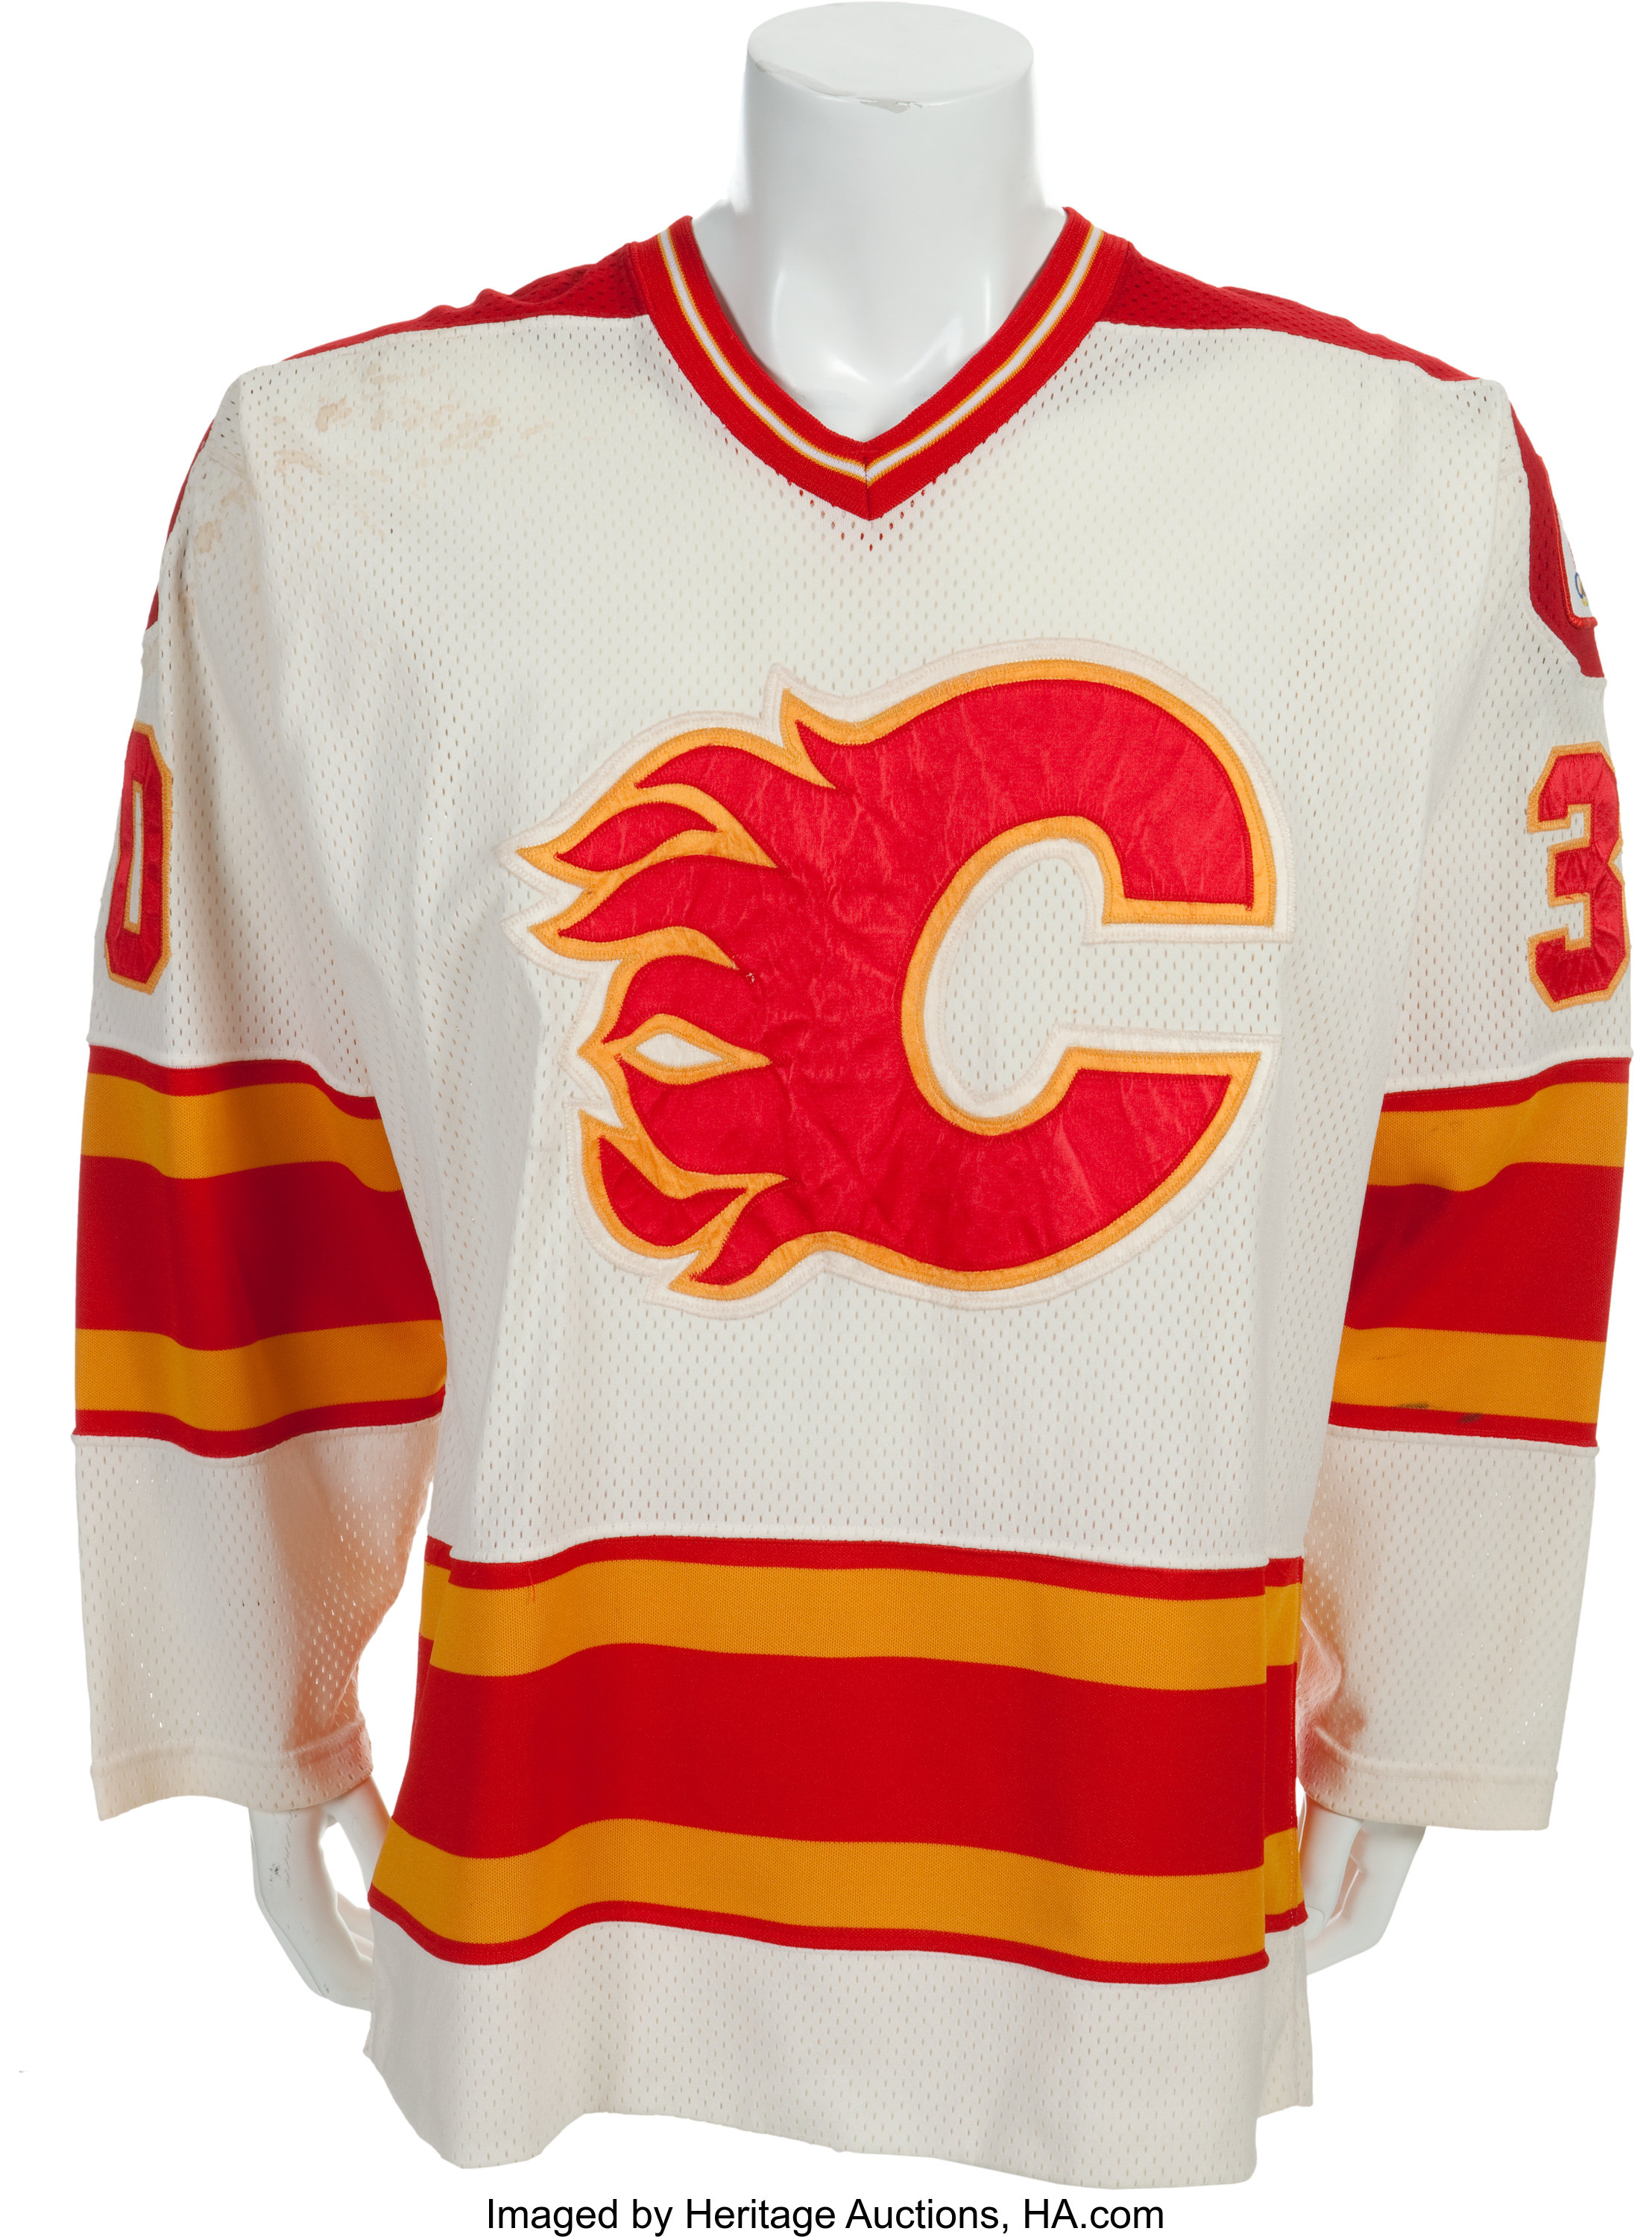 Calgary Flames 2014 - 2015 Retro Game Worn Jersey, This jer…